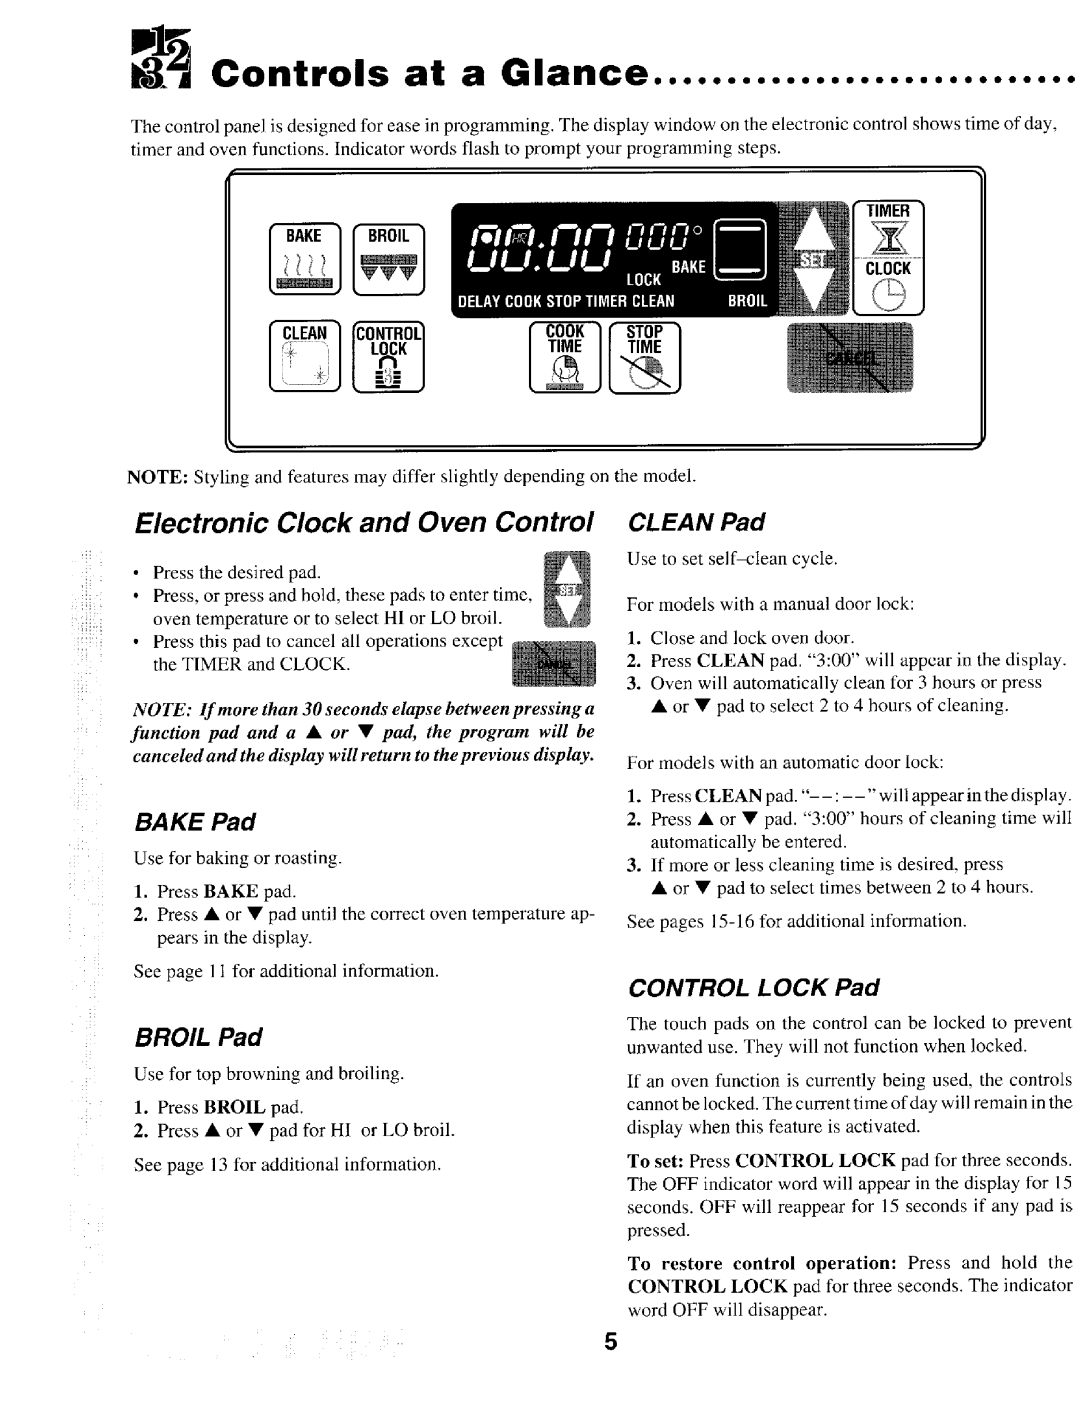 Maytag T1 1 i3Controls at a Glance, Electronic Clock and Oven Control CLEAN Pad, BROIL Pad, CONTROL LOCK Pad, BAKE Pad 